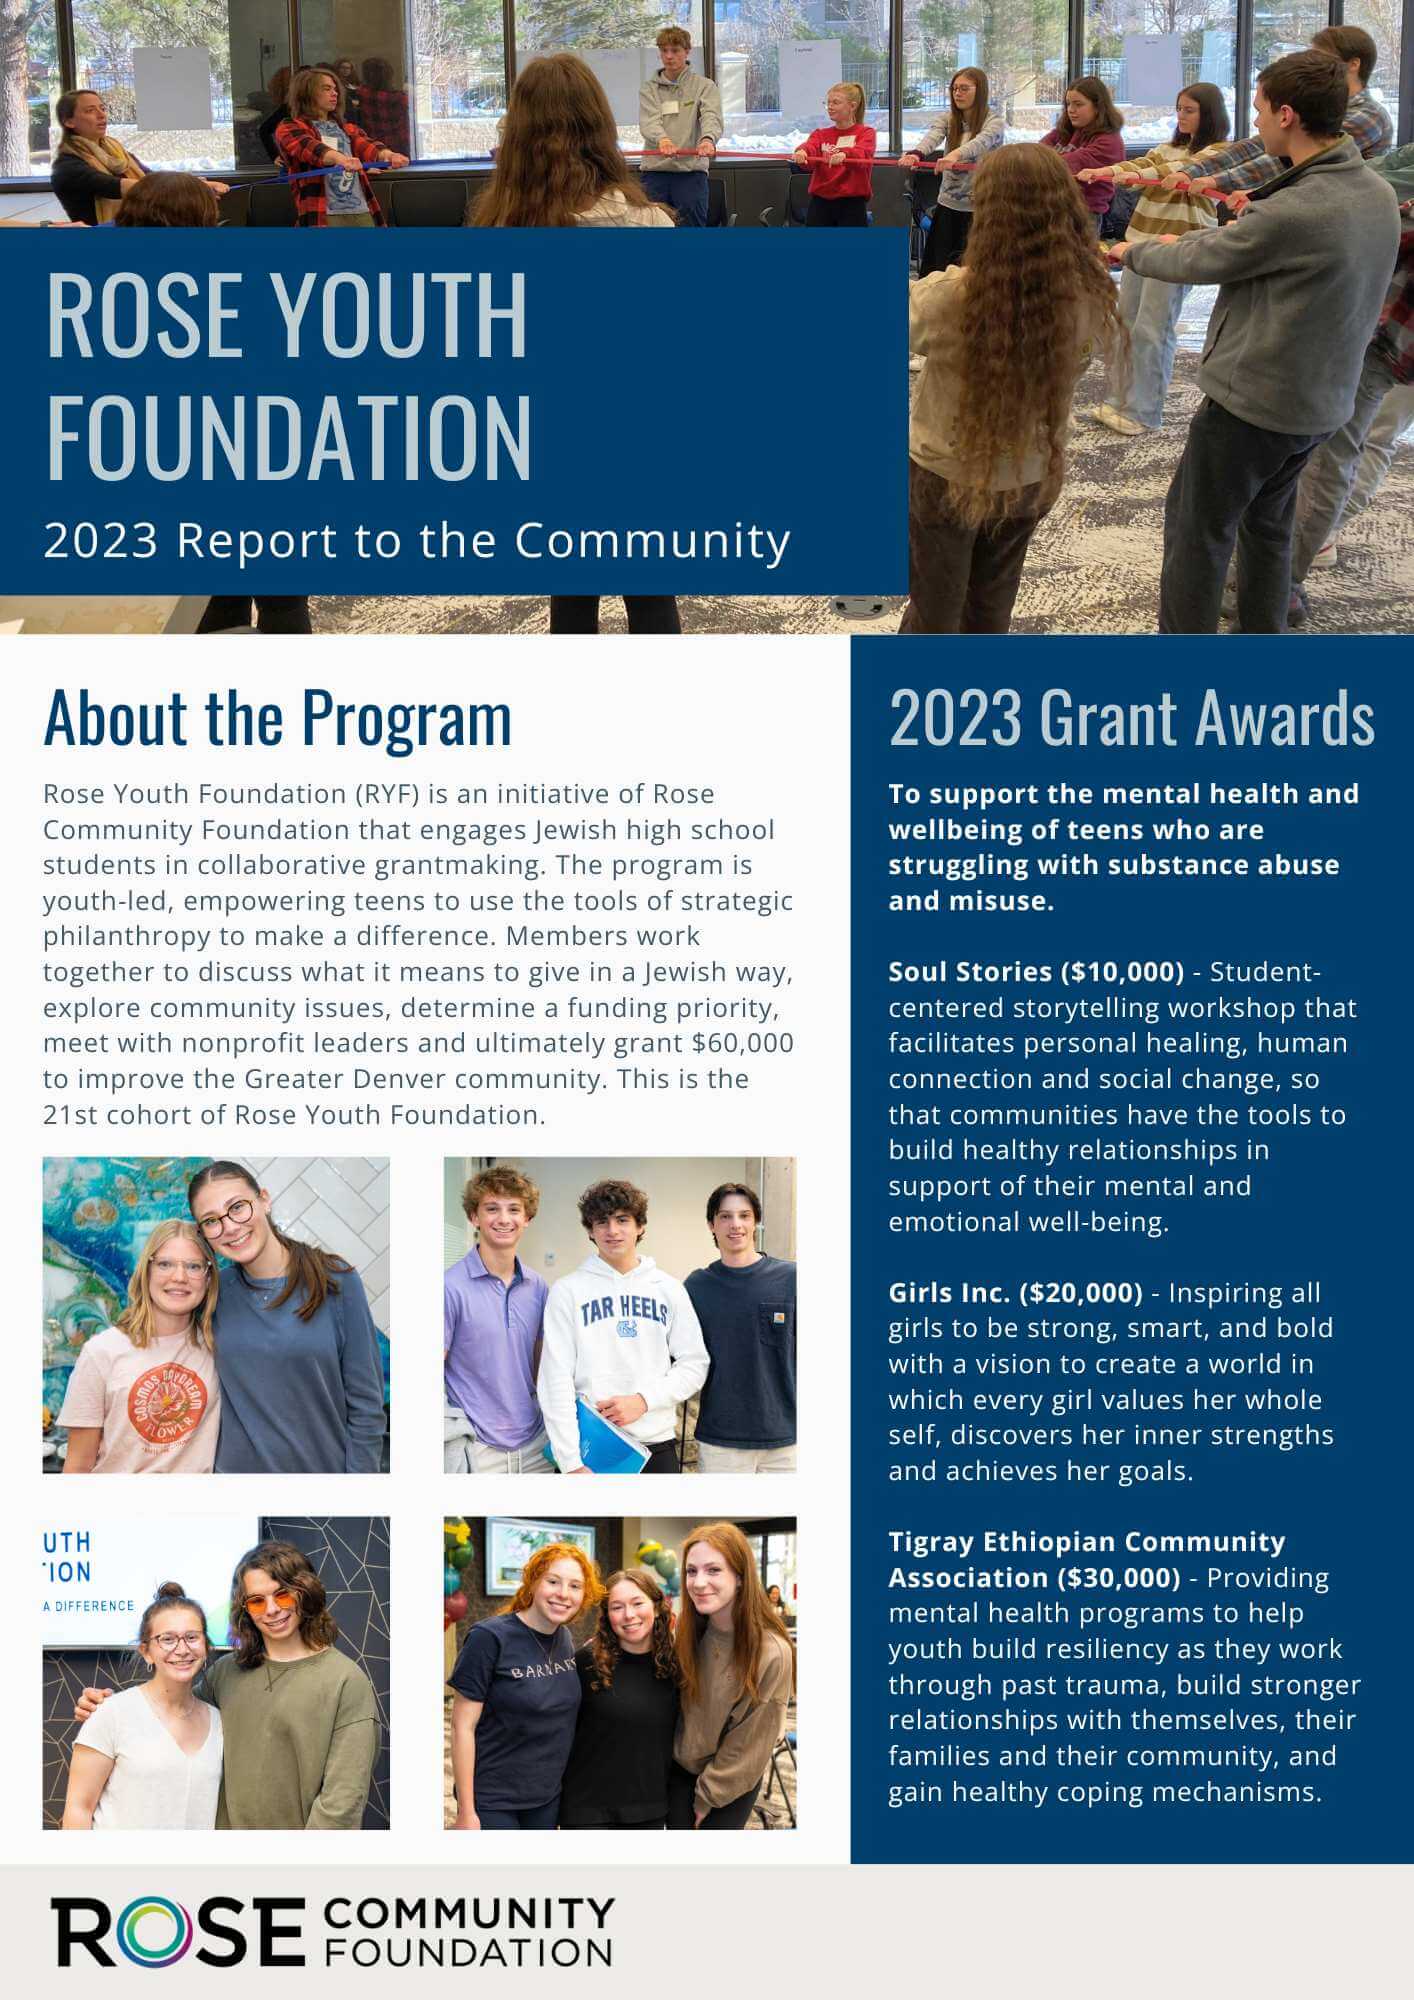 A screenshot of the Rose Youth Foundation 2023 Report to the Community